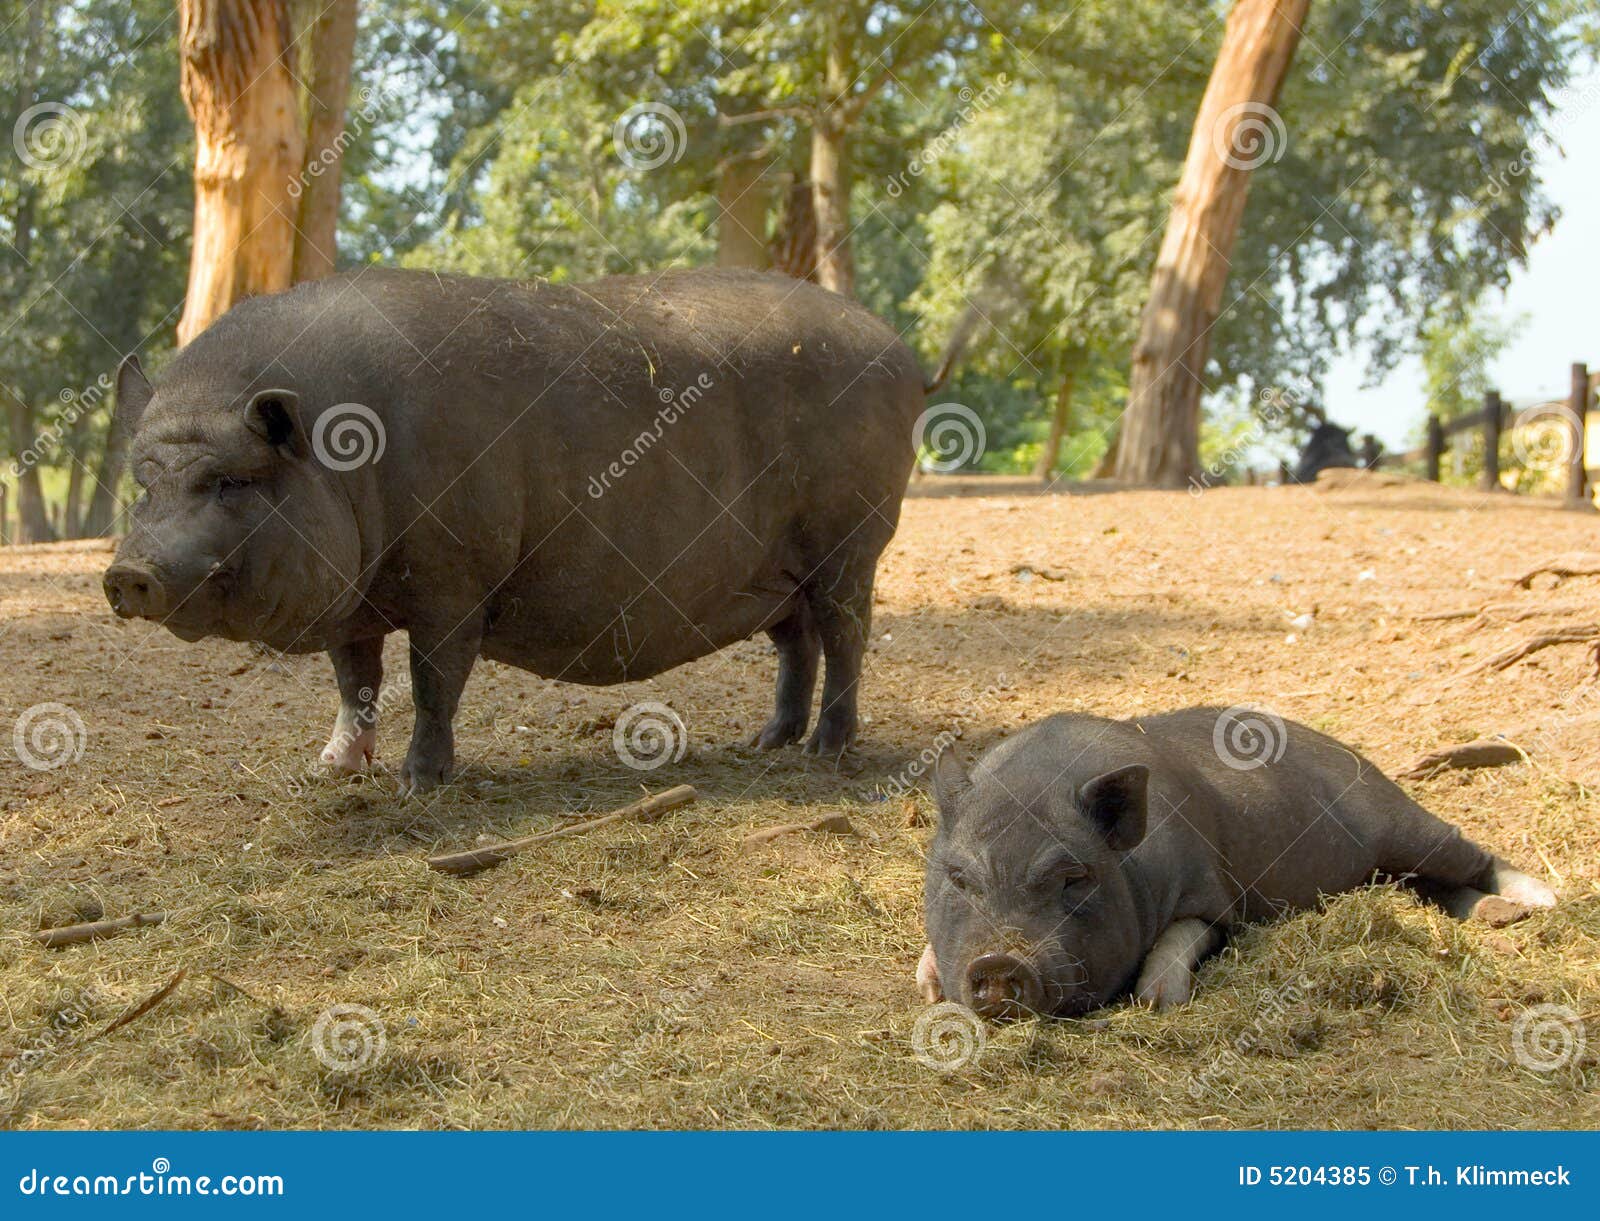 clipart pot bellied pig - photo #33